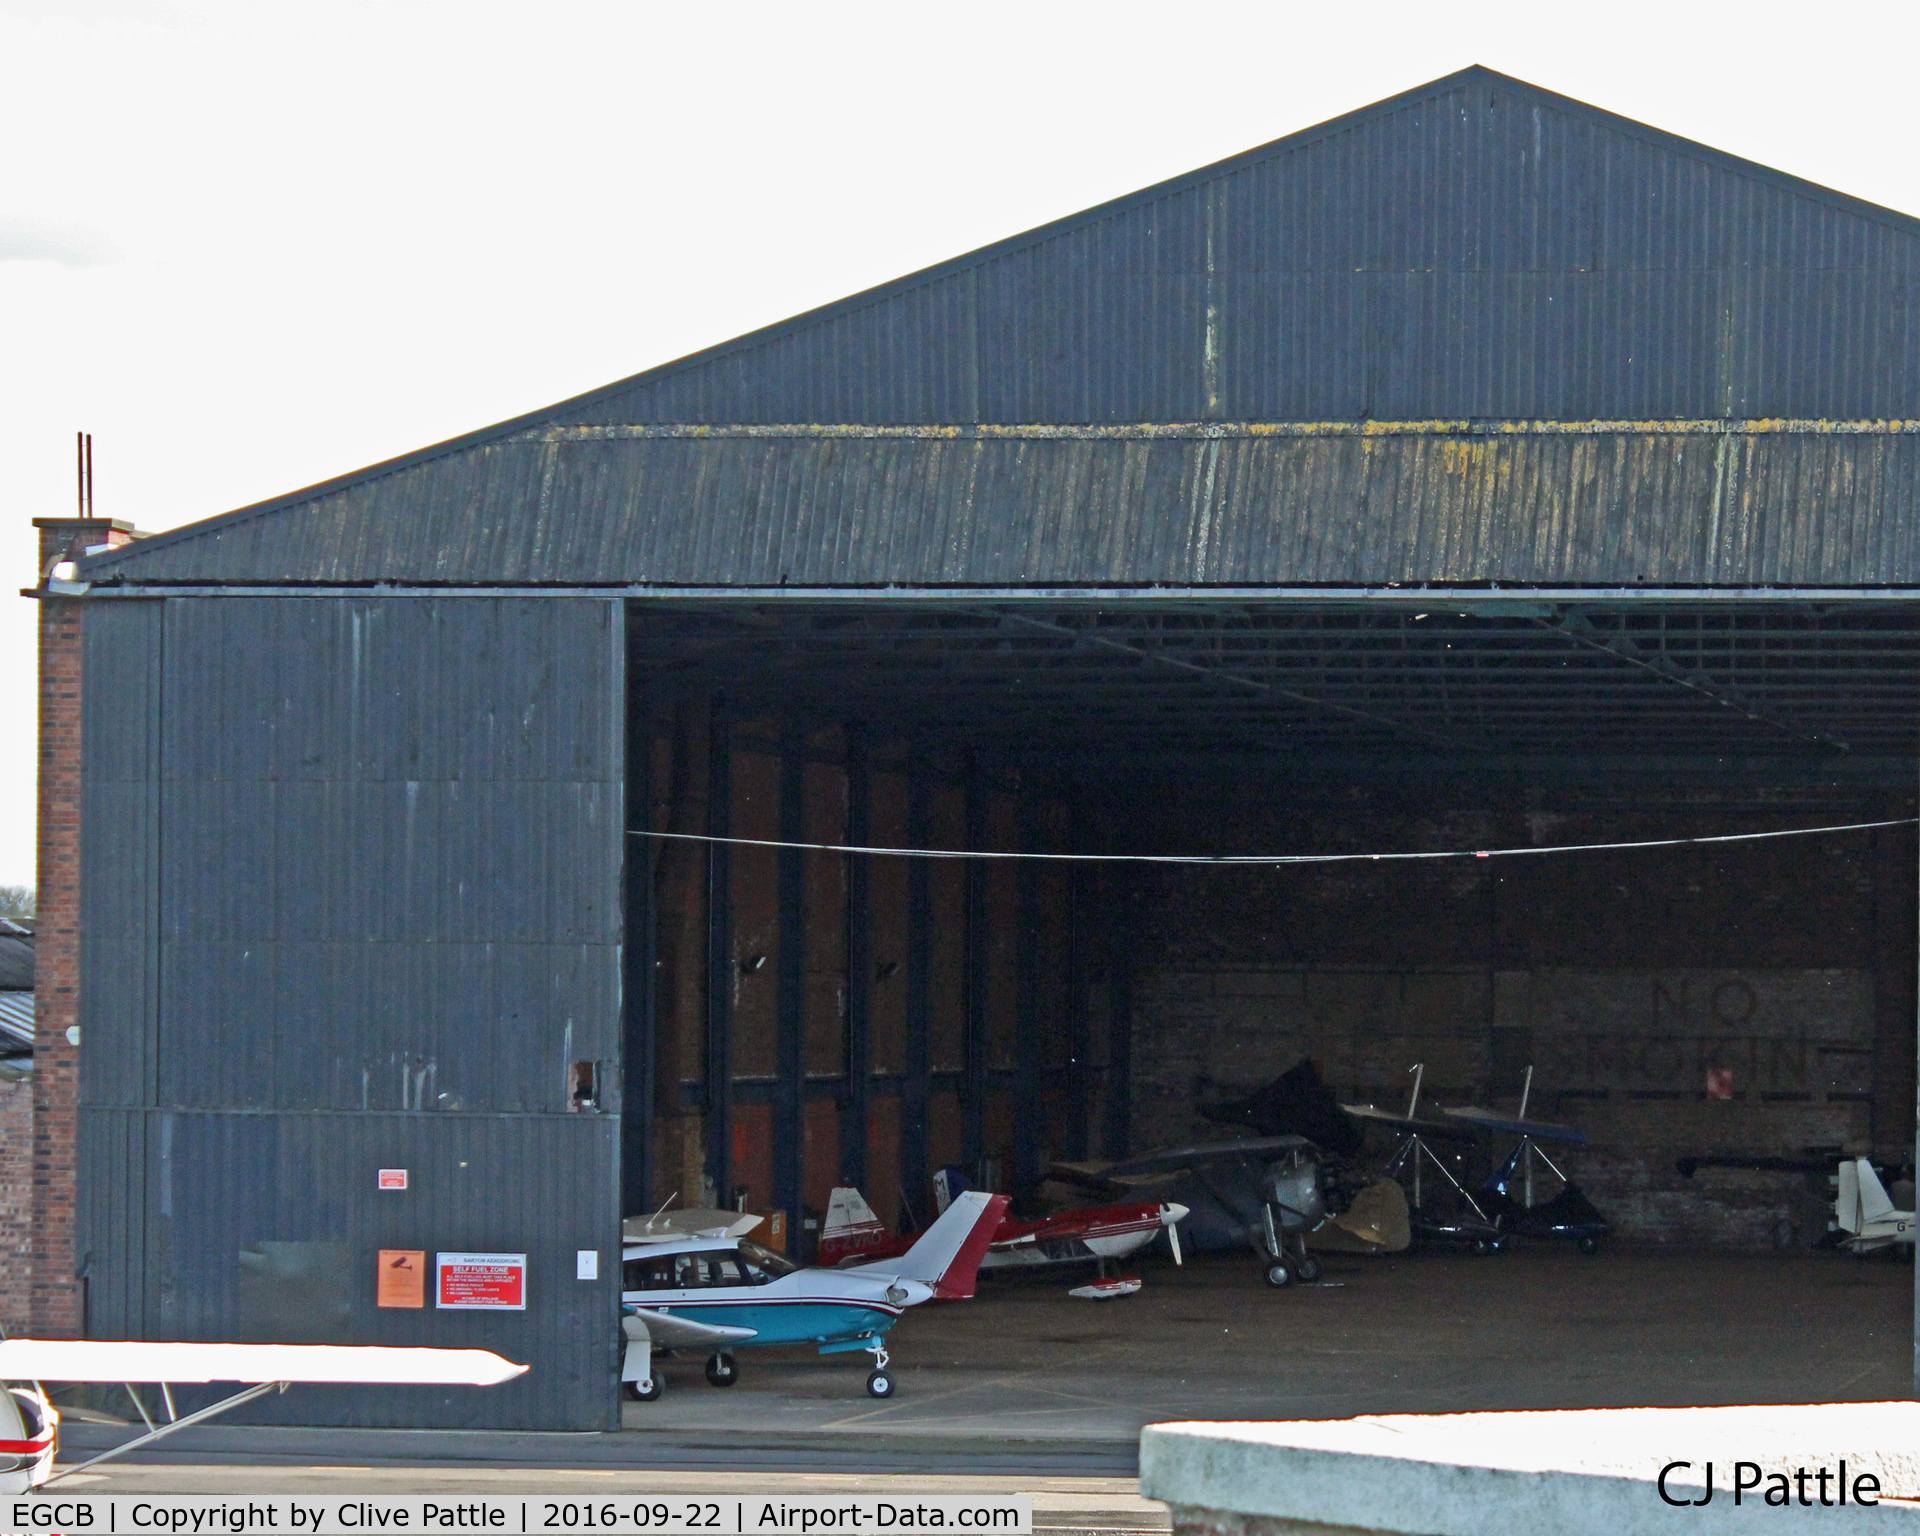 City Airport Manchester, Manchester, England United Kingdom (EGCB) - Look inside a hangar at Manchester City Airport, Barton EGCB